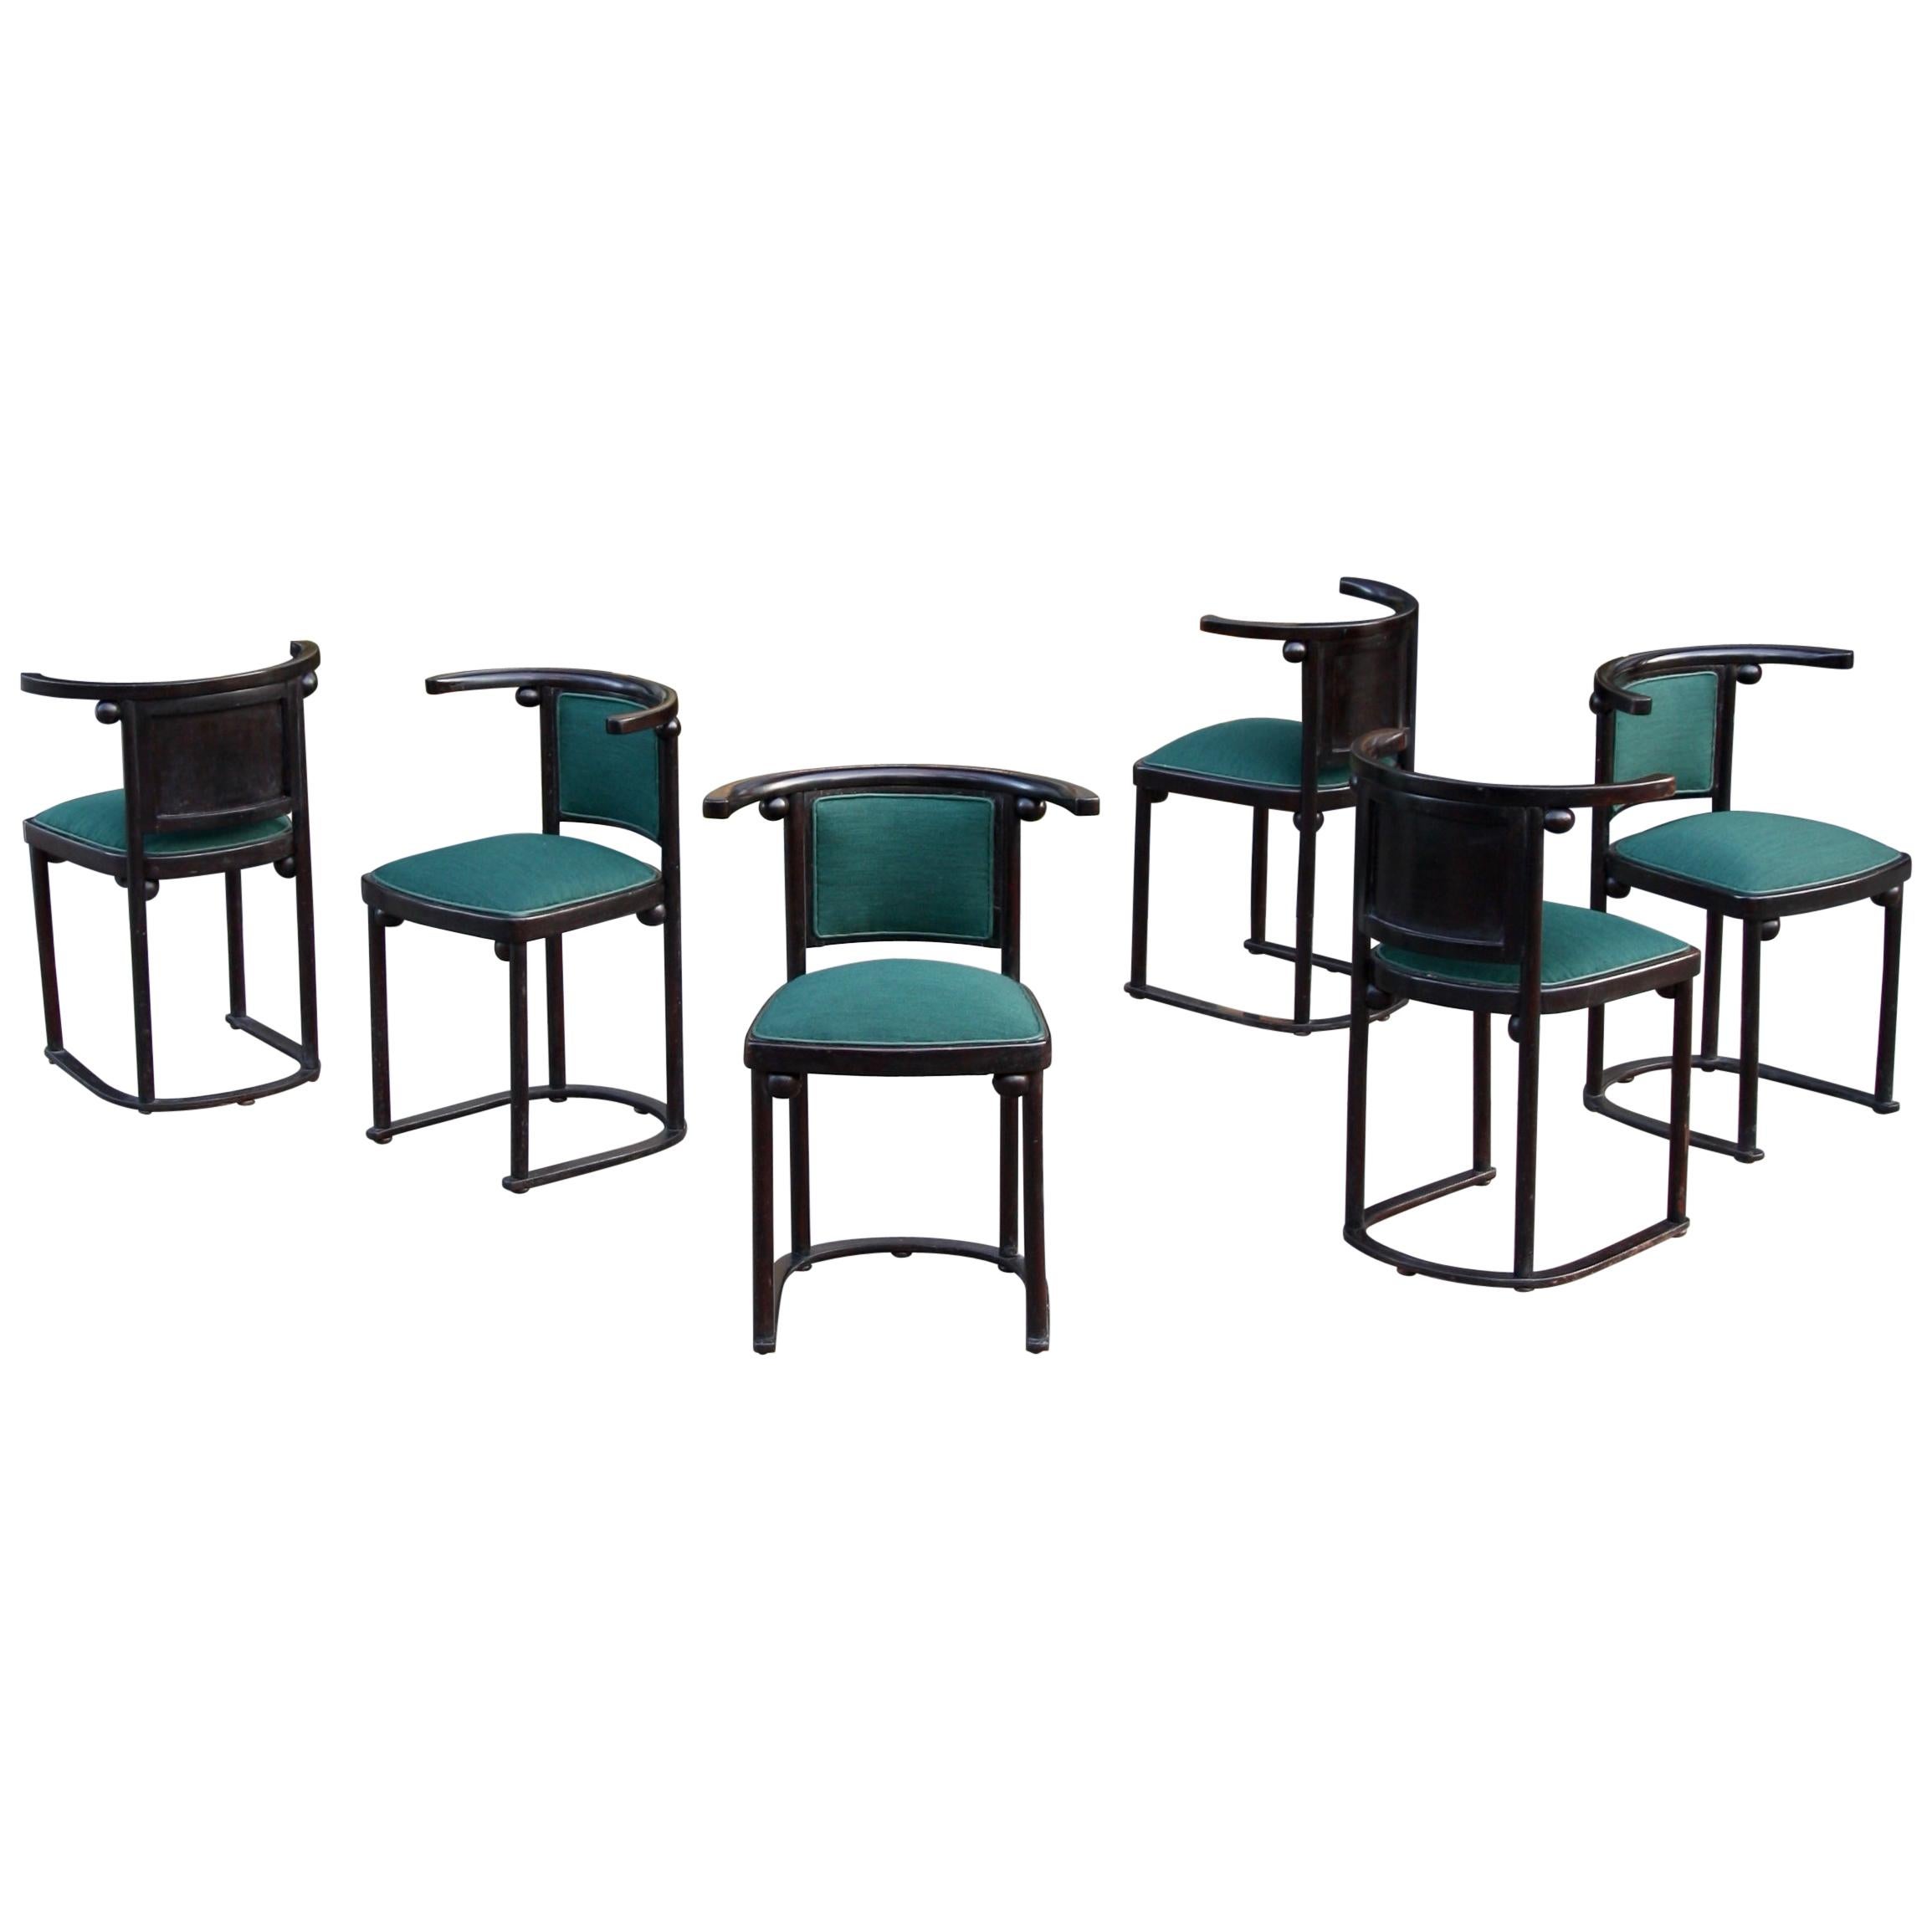 Six Early 1st Edition Black Lacquer Fledermaus Chairs, Josef Hoffmann circa 1910